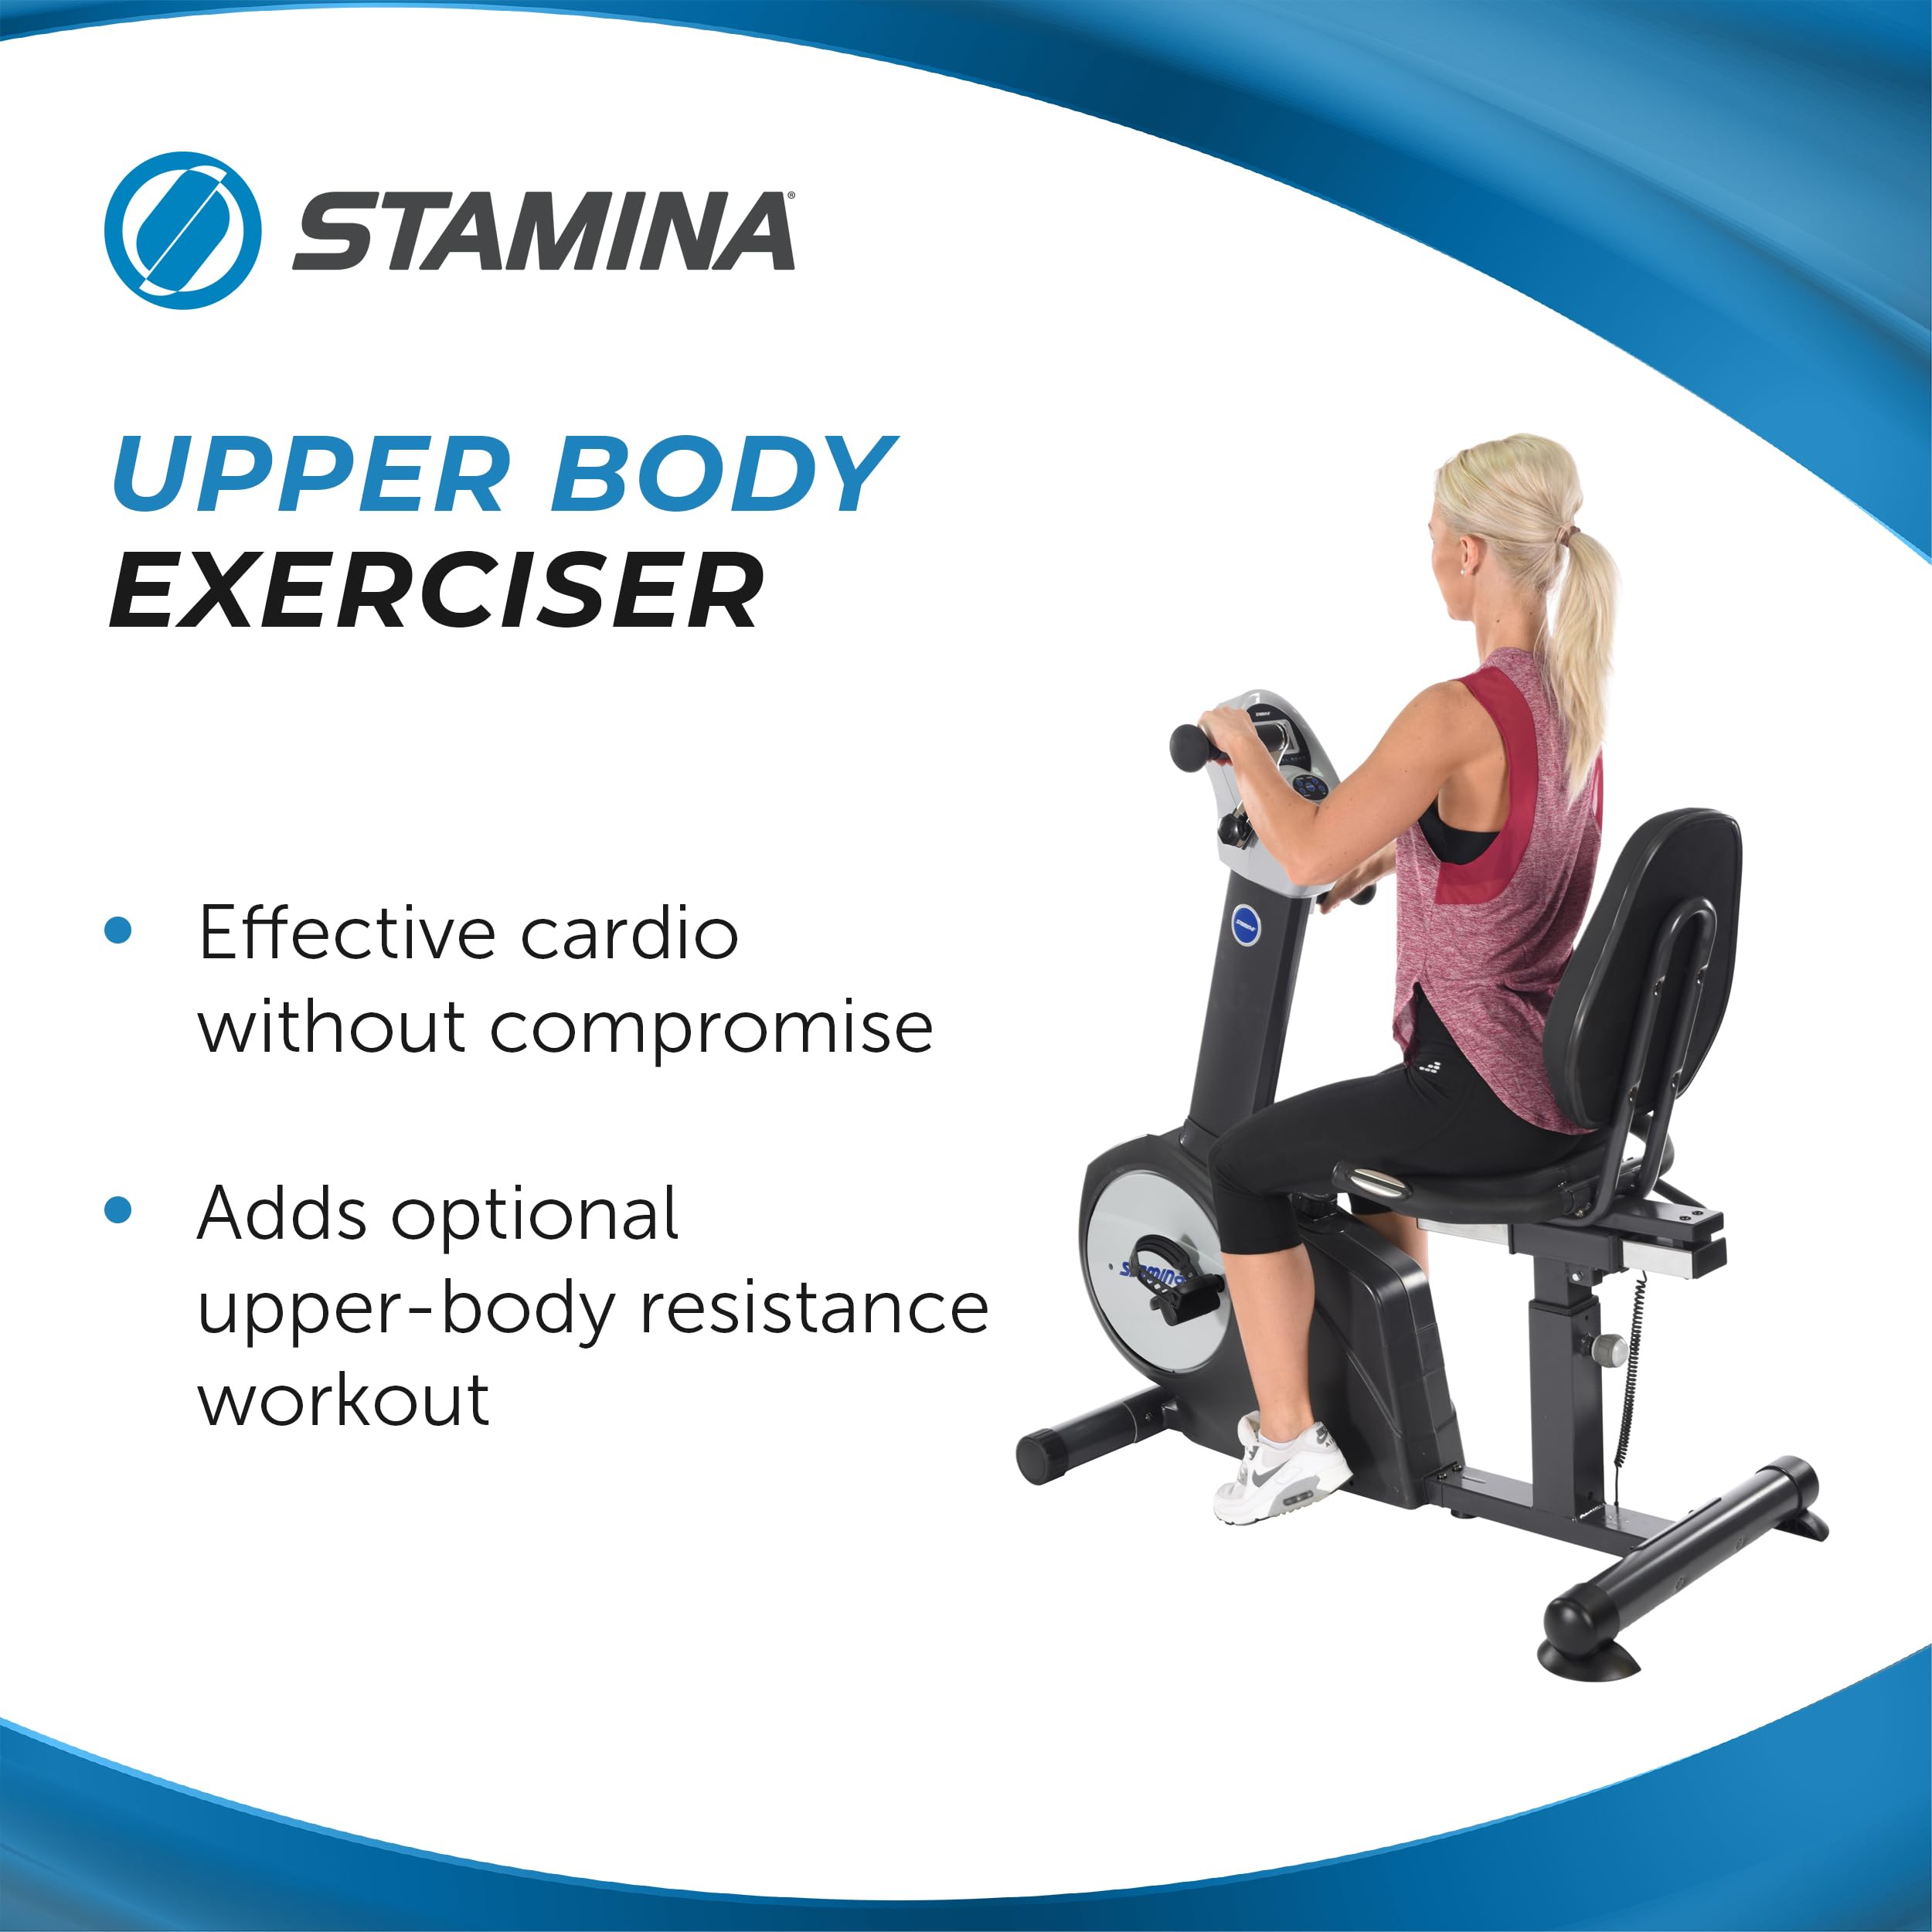 Stamina Elite Total Body Recumbent Bike with Arm Workout - Recumbent Cross Trainer with Smart Workout App for Home Workout - Up to 250 lbs Weight Capacity